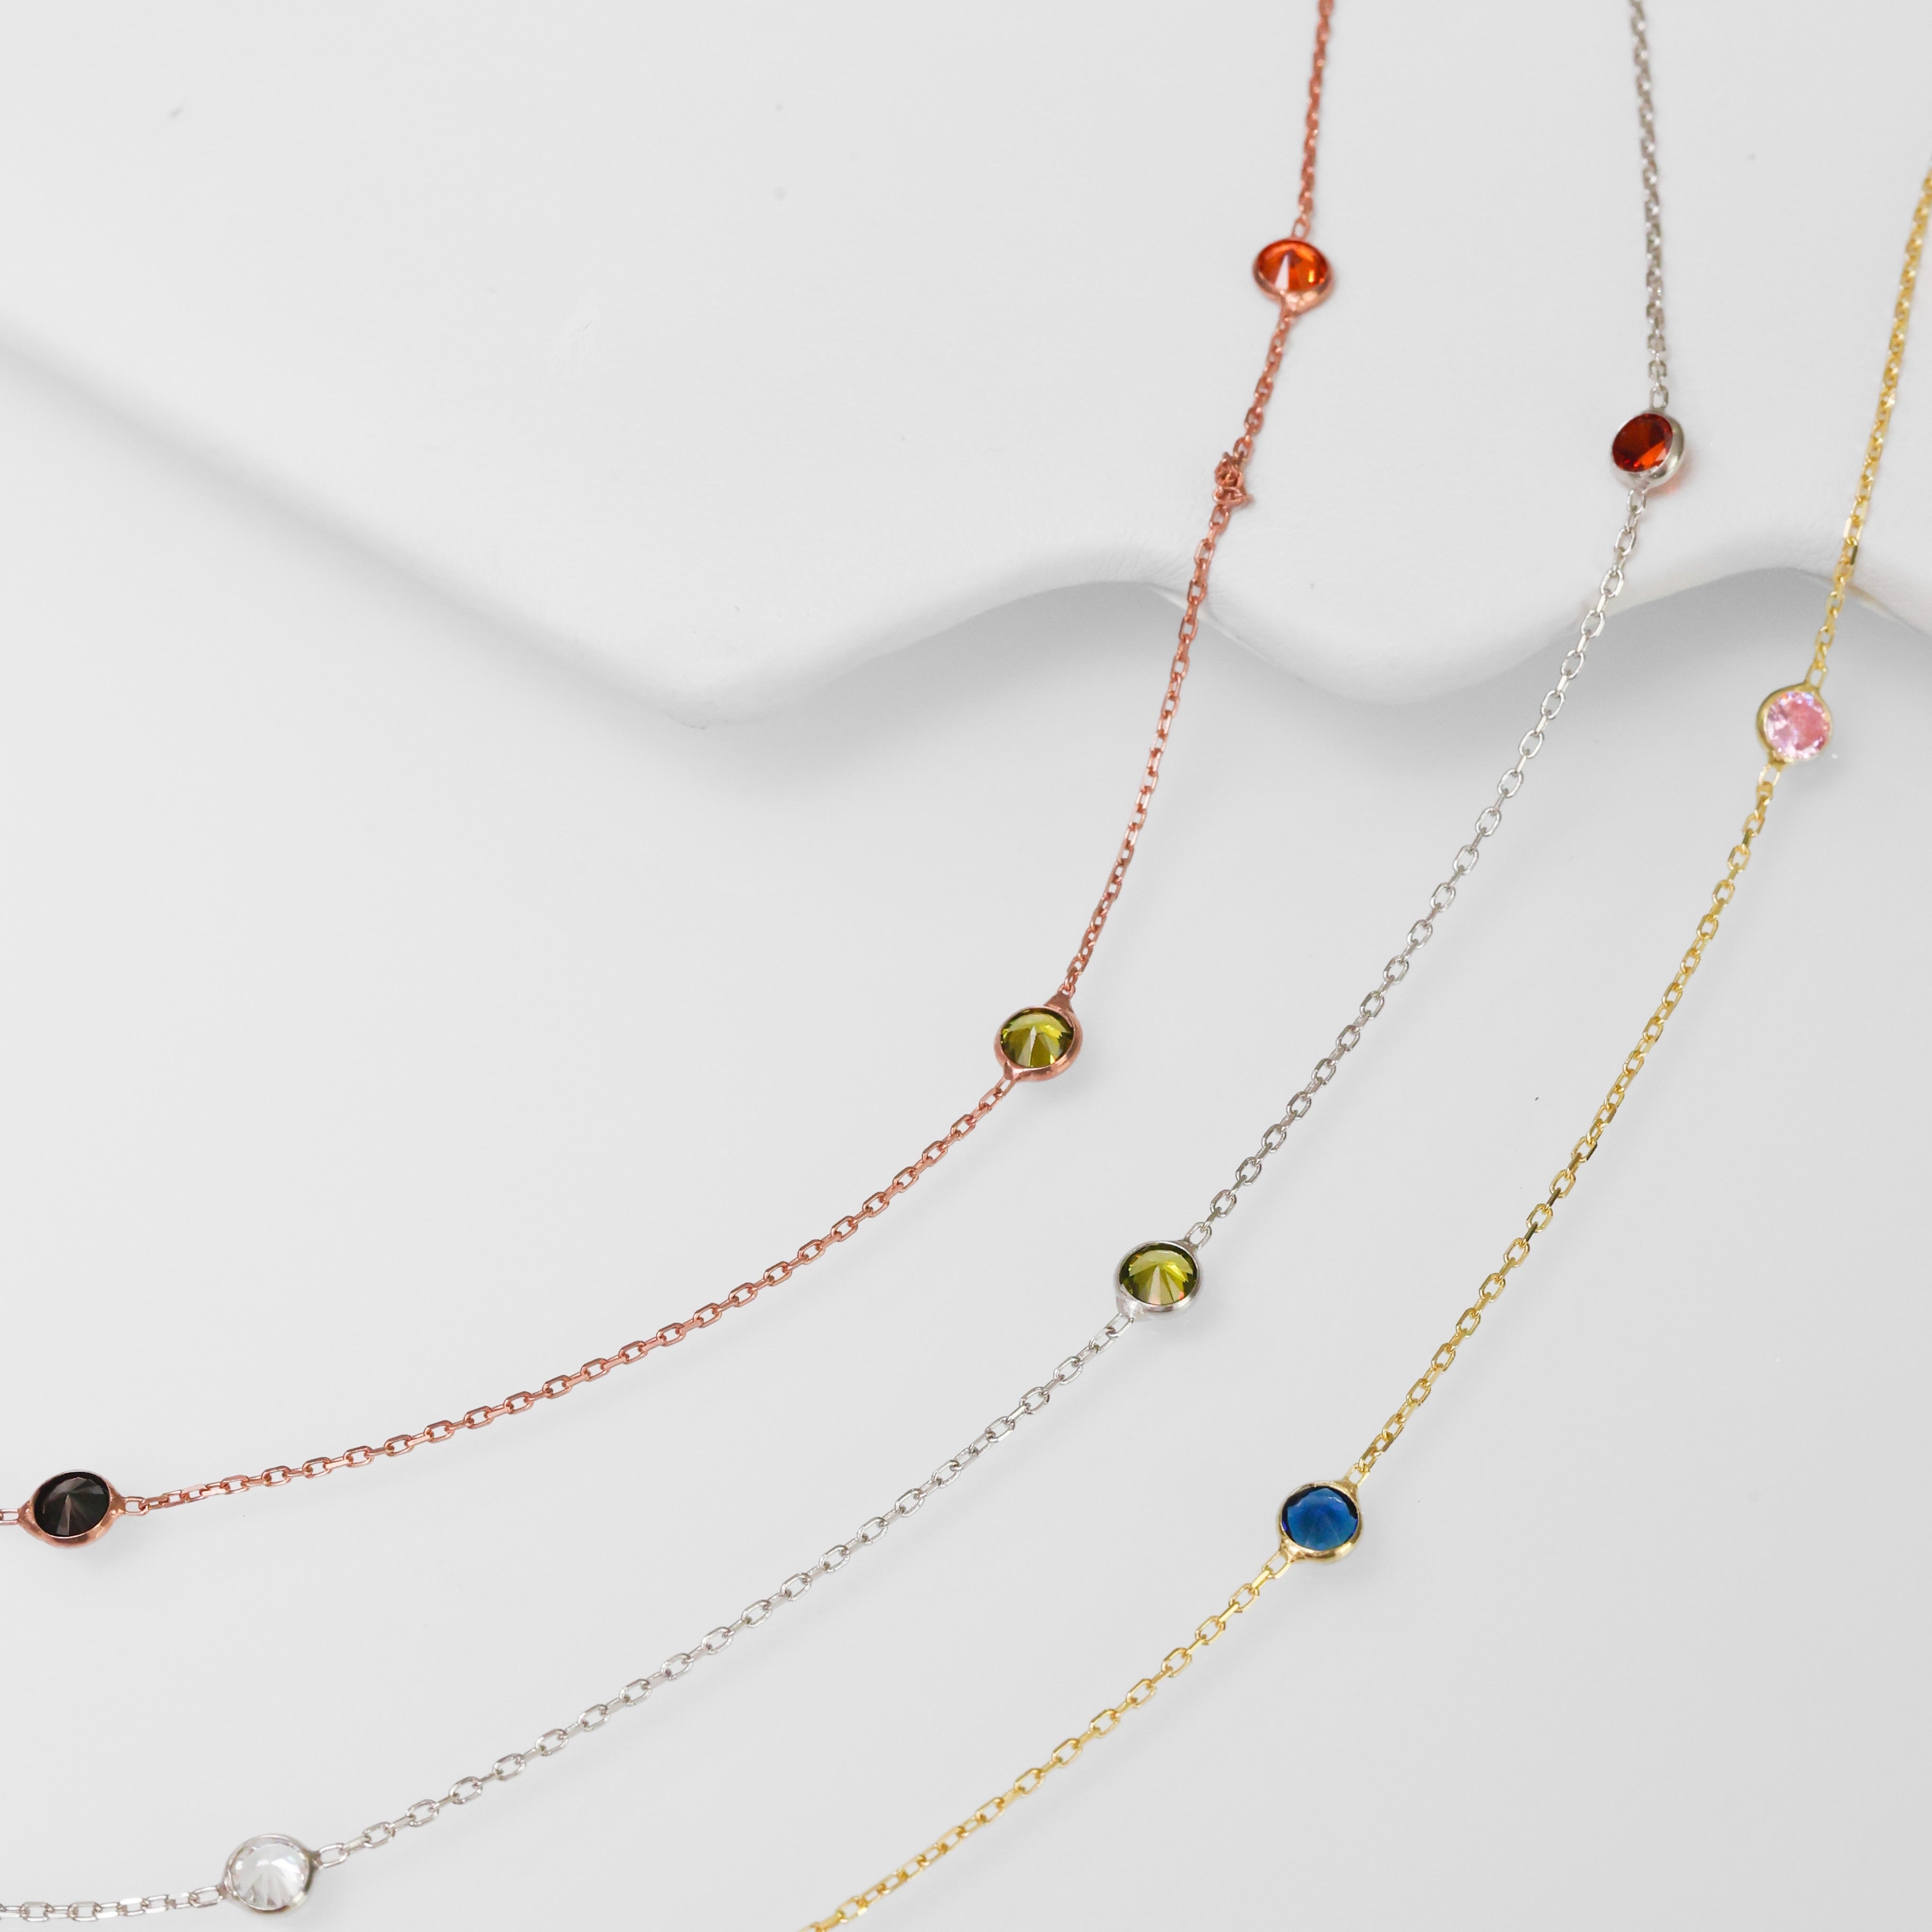 Istiklal Necklace - One meter necklace 